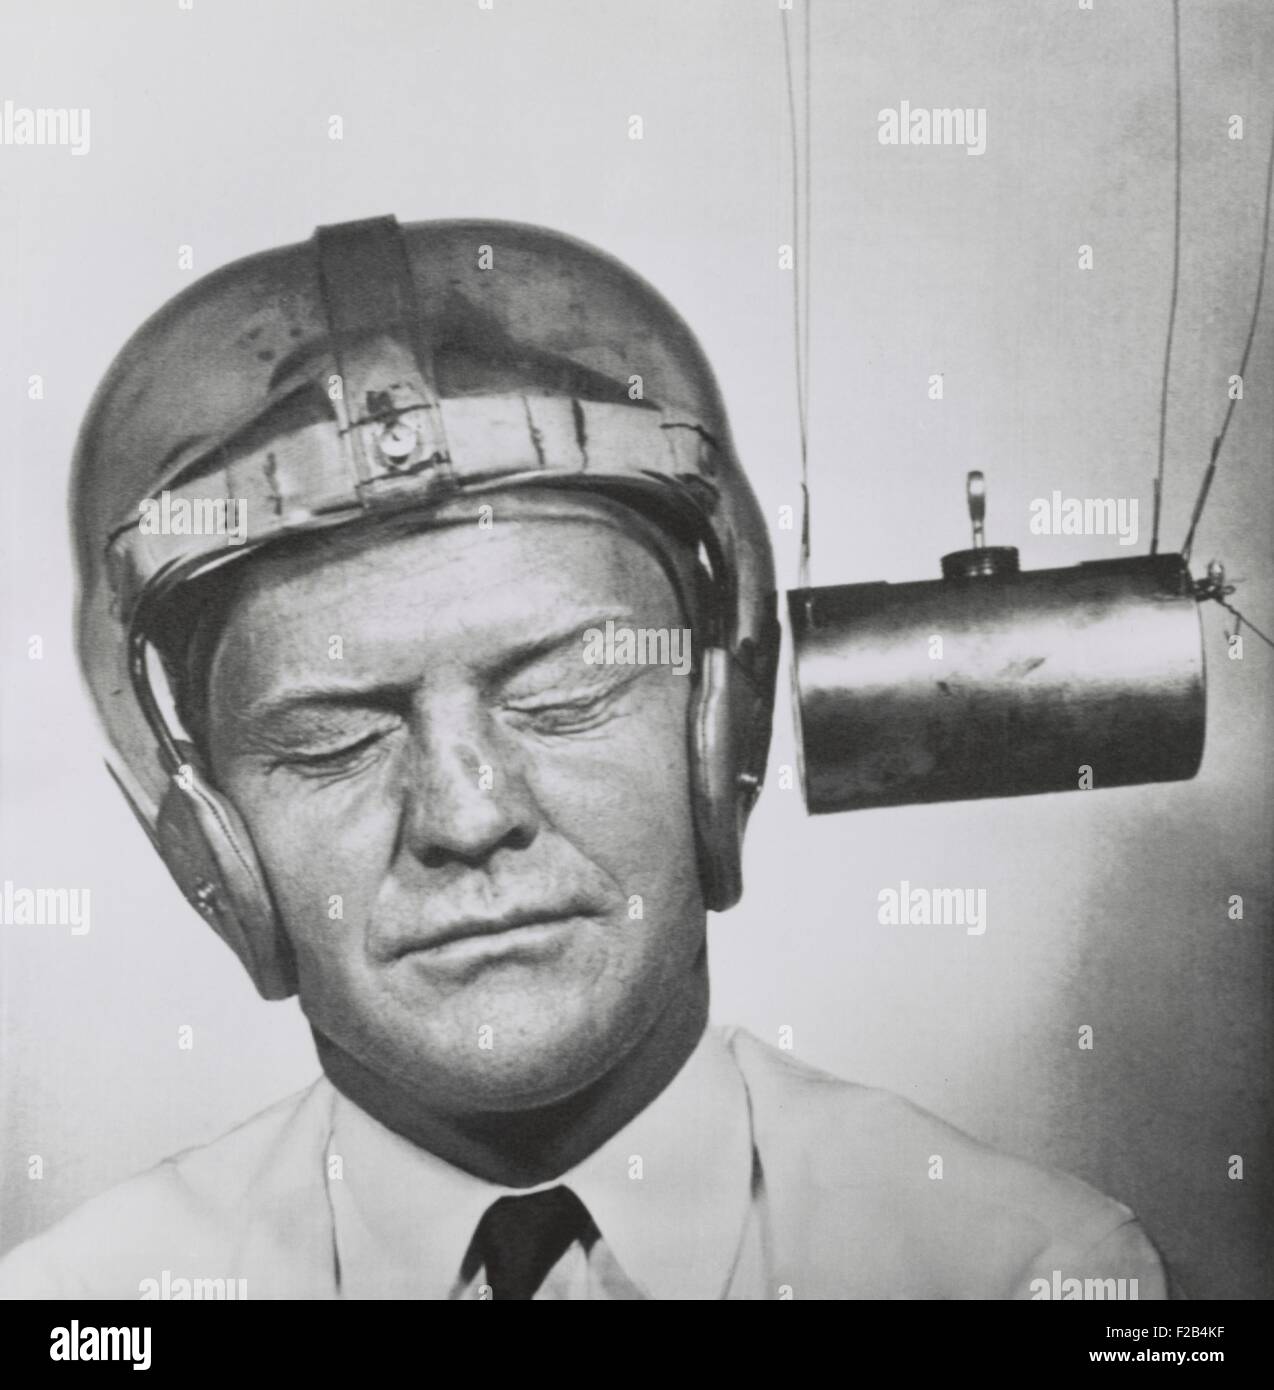 Pendulum pounding a plastic helmet worn for testing to improve headgear for football players. Sept.13, 1950 - (BSLOC 2015 1 219) Stock Photo